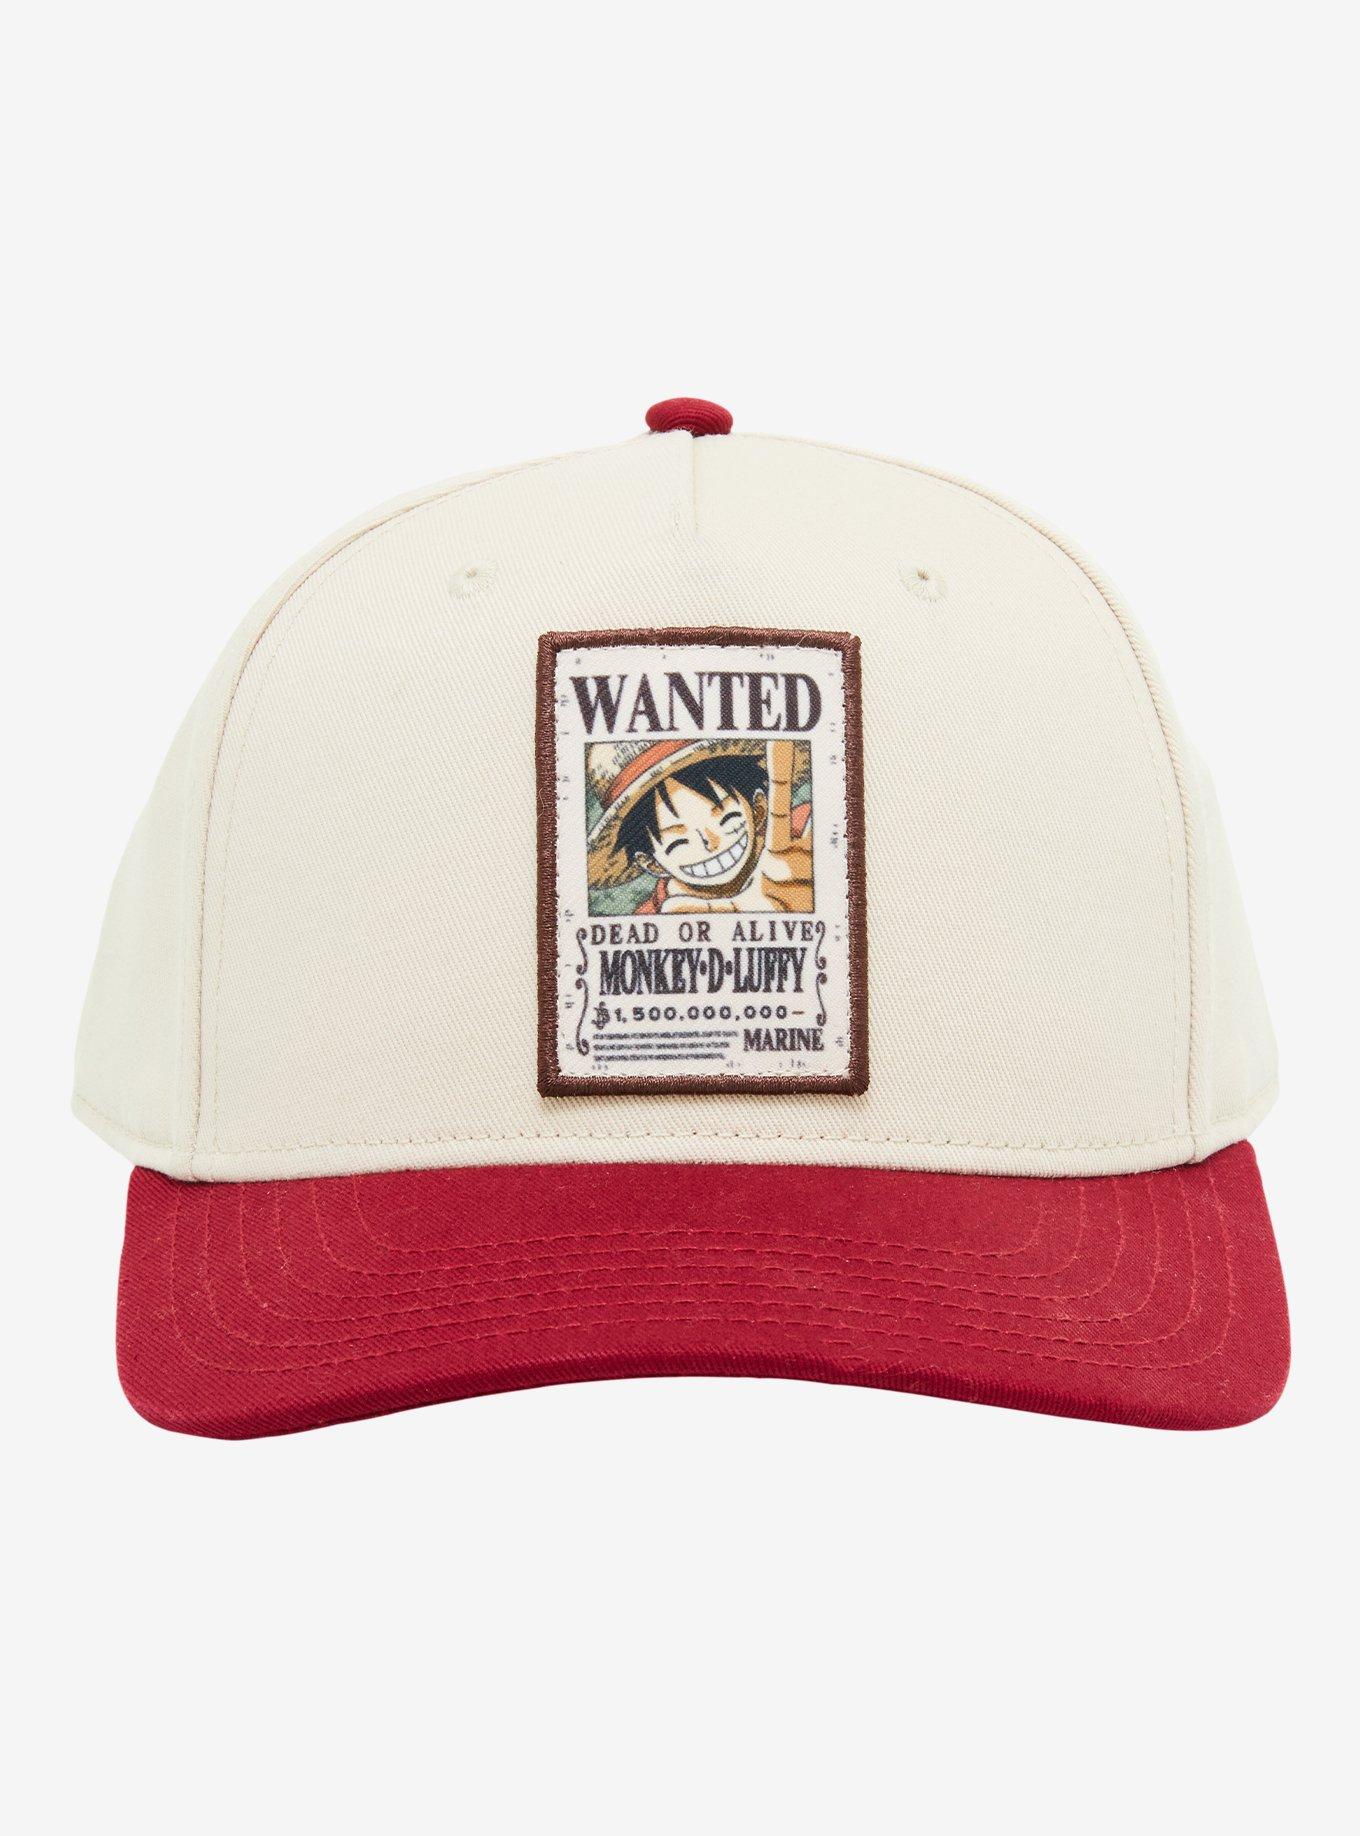 One Piece Monkey D. Luffy Wanted Poster Cap - BoxLunch Exclusive, , alternate